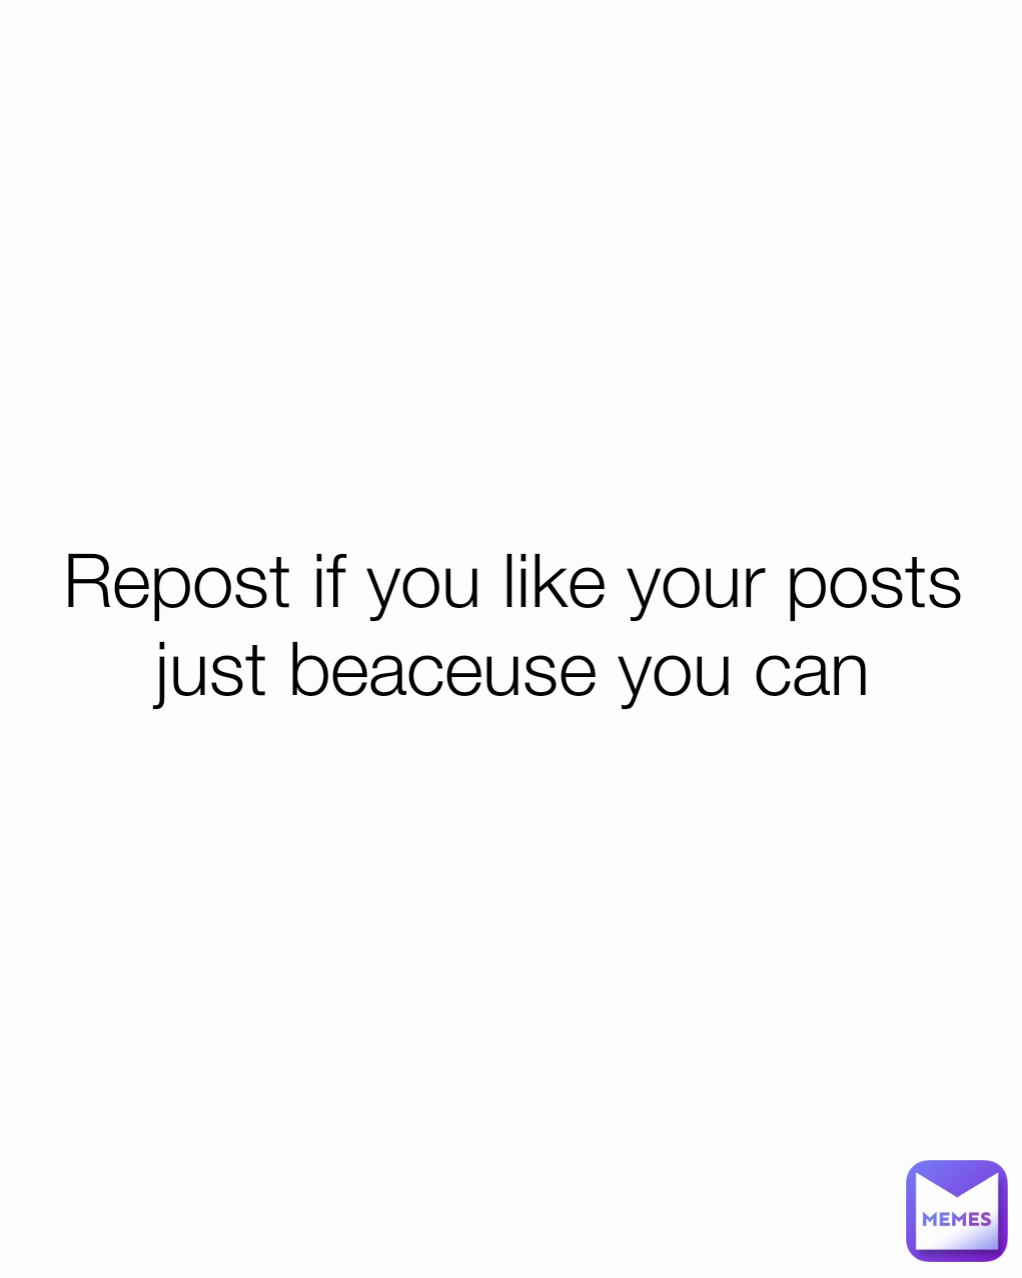 Repost if you like your posts just beaceuse you can